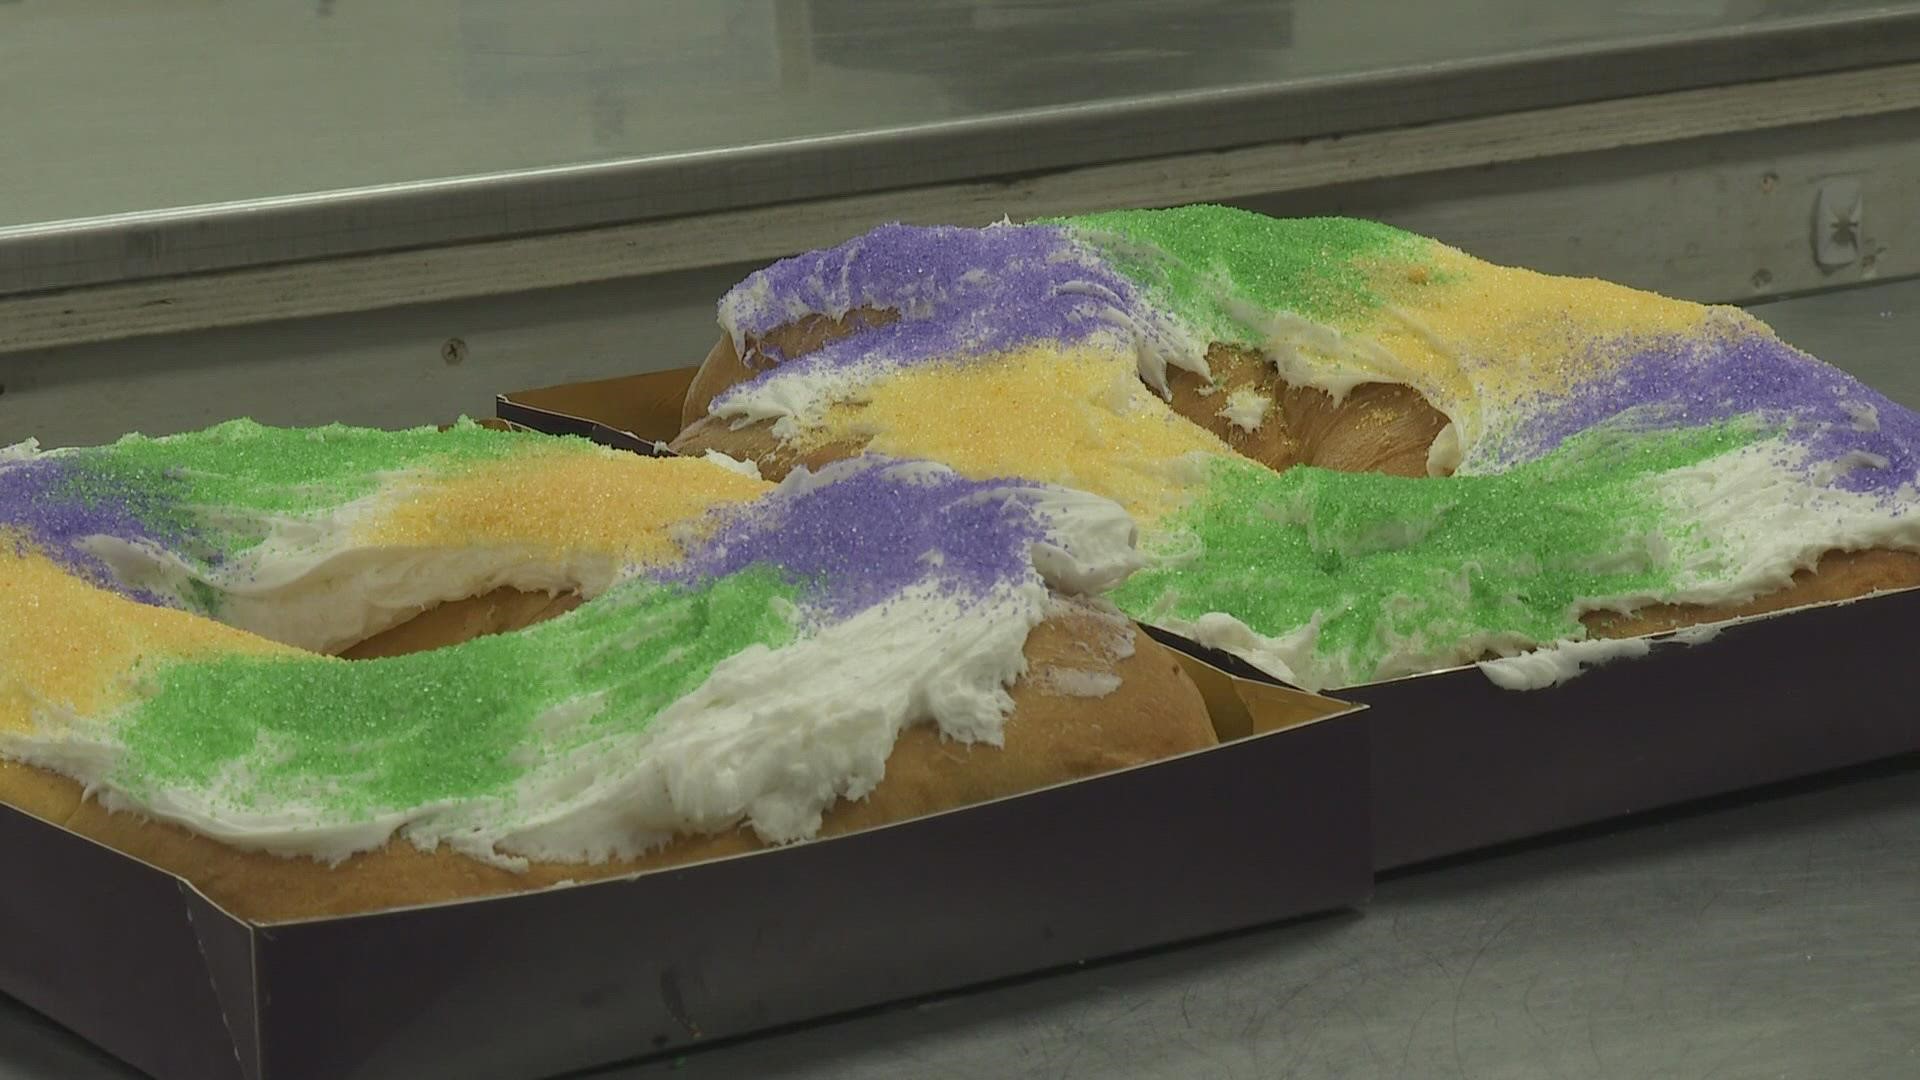 It's the most wonderful time of the year: King Cake Season!